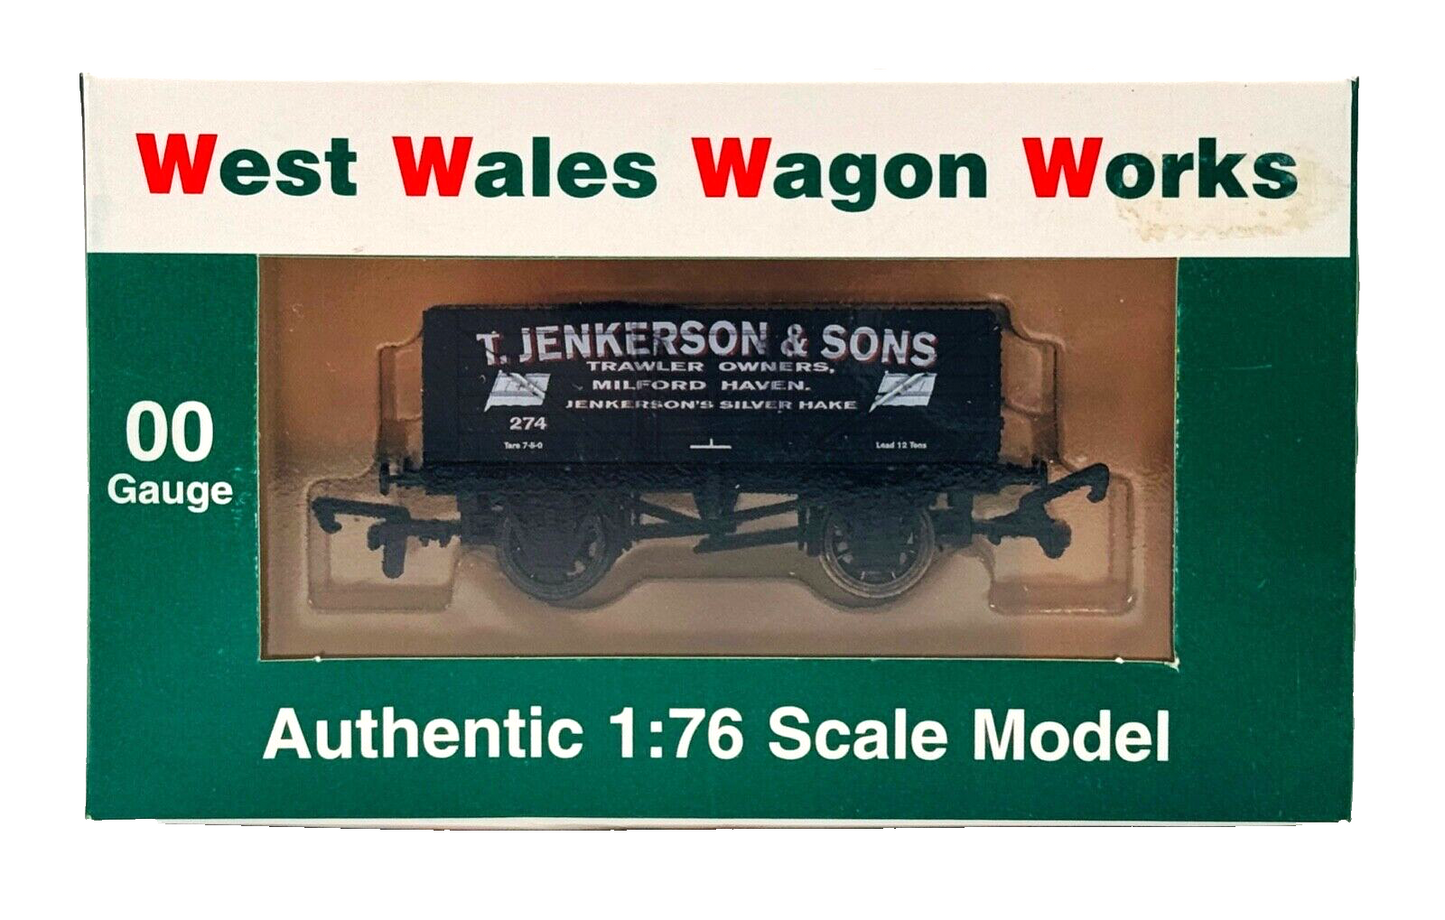 DAPOL 00 GAUGE - T. JENKERSON TRAWLER OWNERS OF MILFORD HAVEN  (LIMITED EDITION)